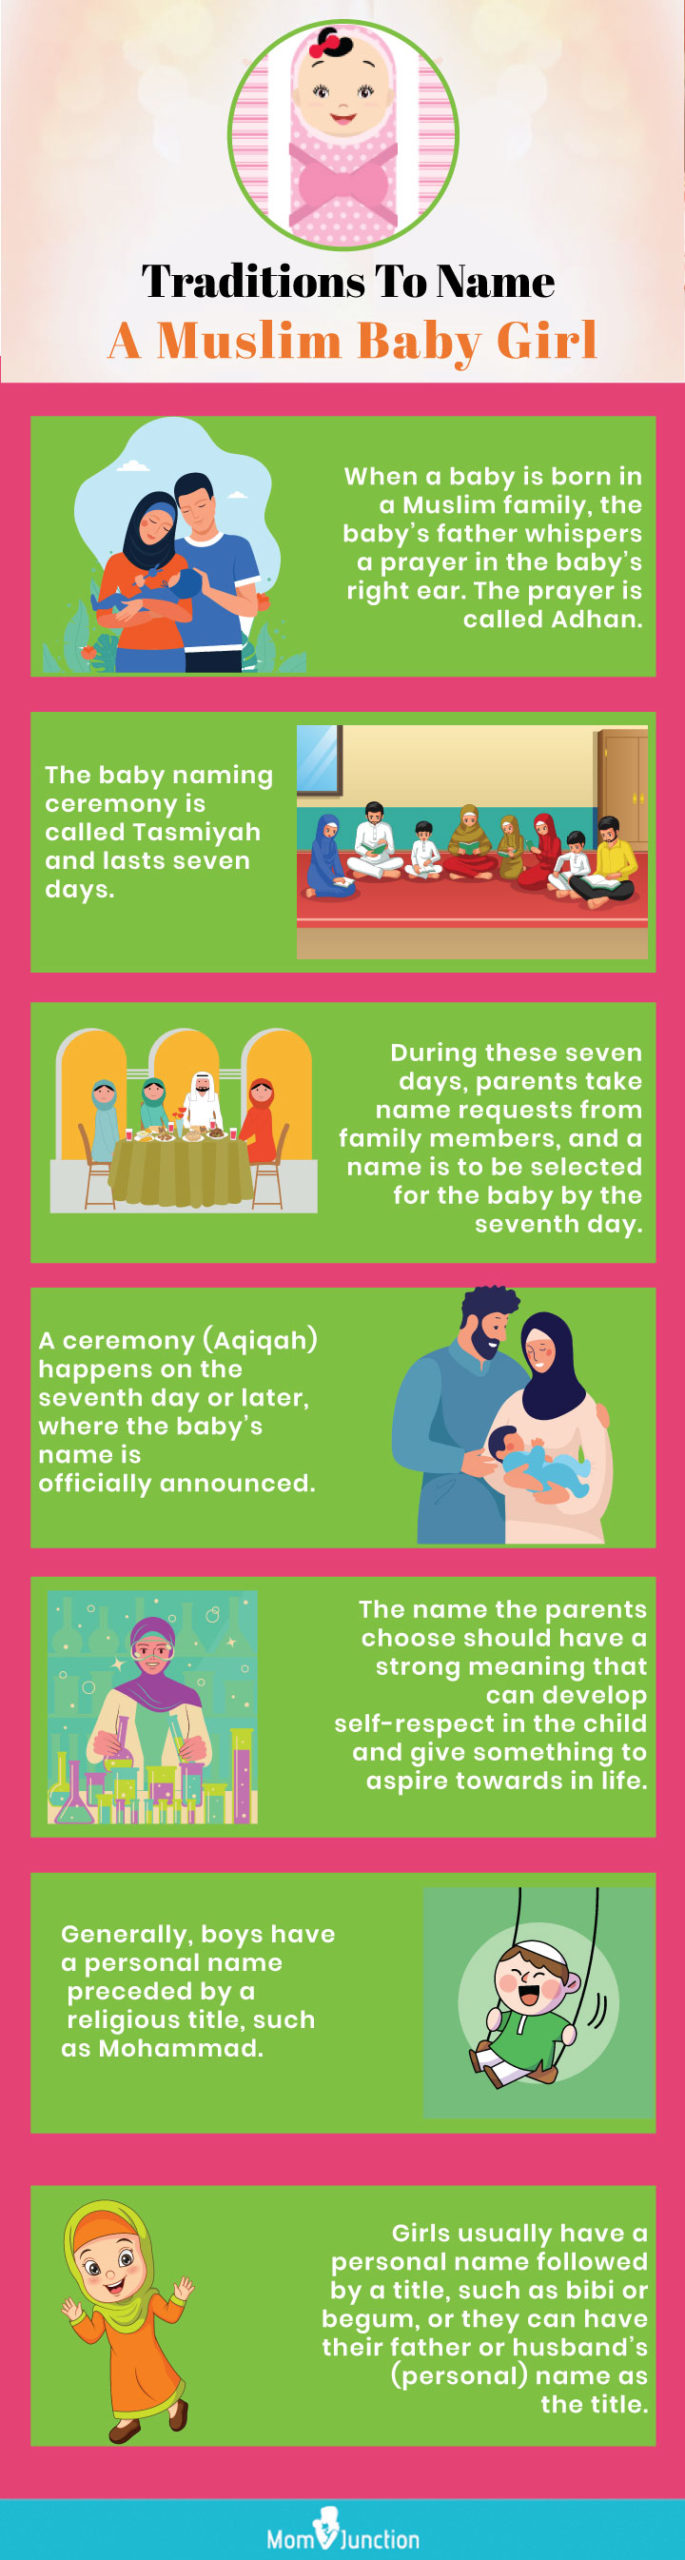 traditions to name a muslim baby girl [infographic]